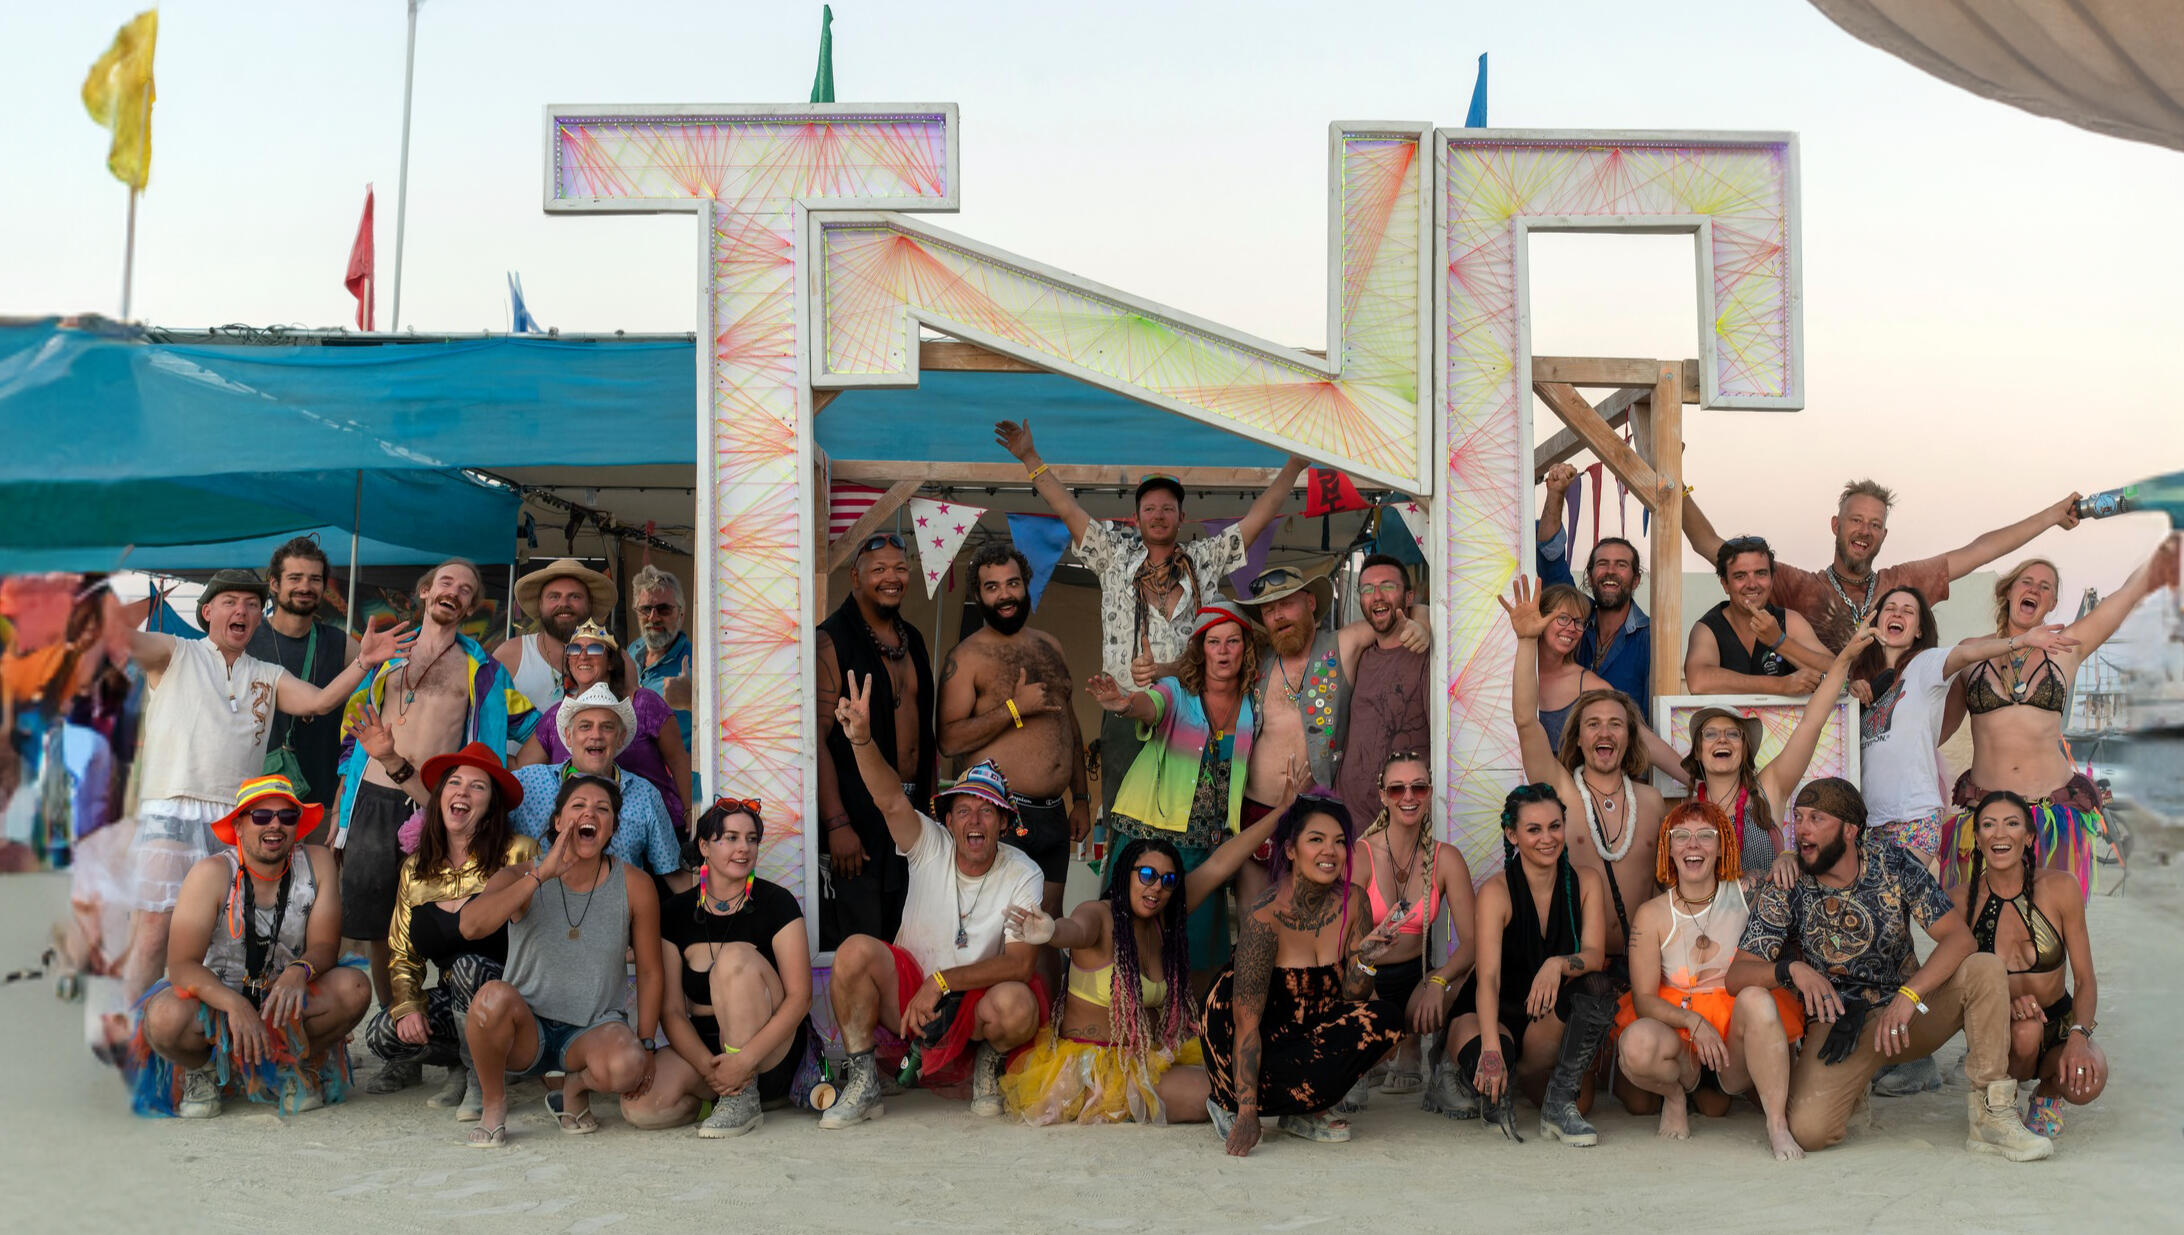 Most of our ING group at burnING man,